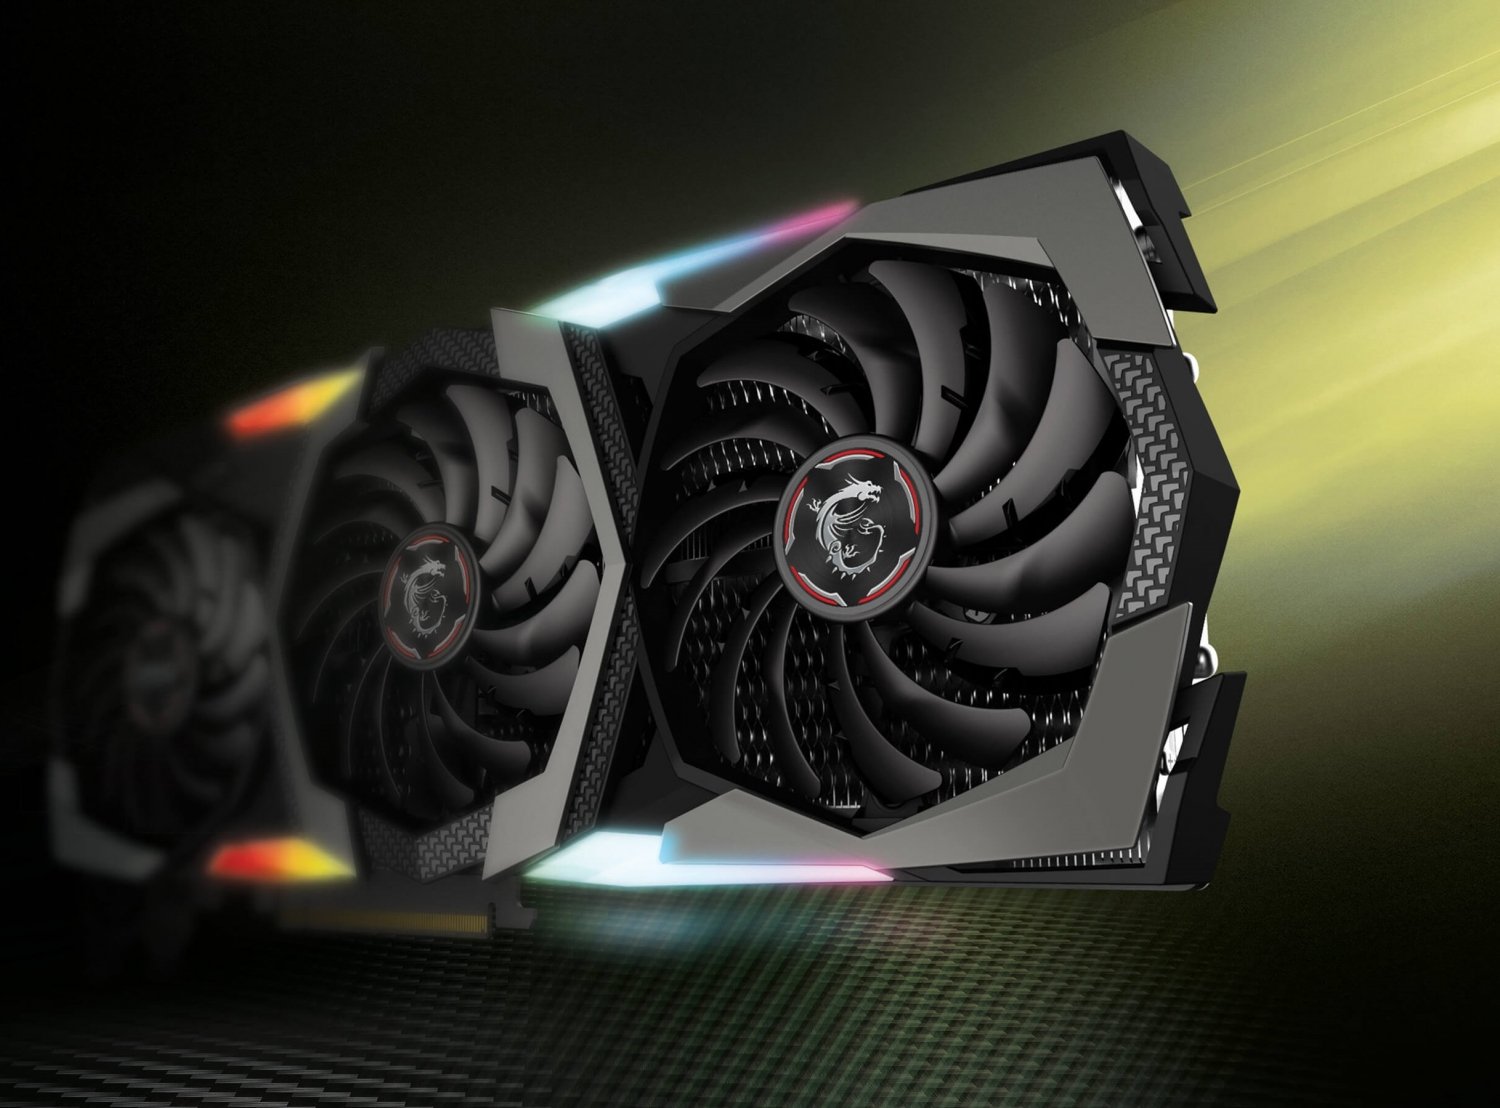 Msi Uses 16gbps Gddr6 Memory On New Geforce Rtx 2080 Ti Gaming Z Trio